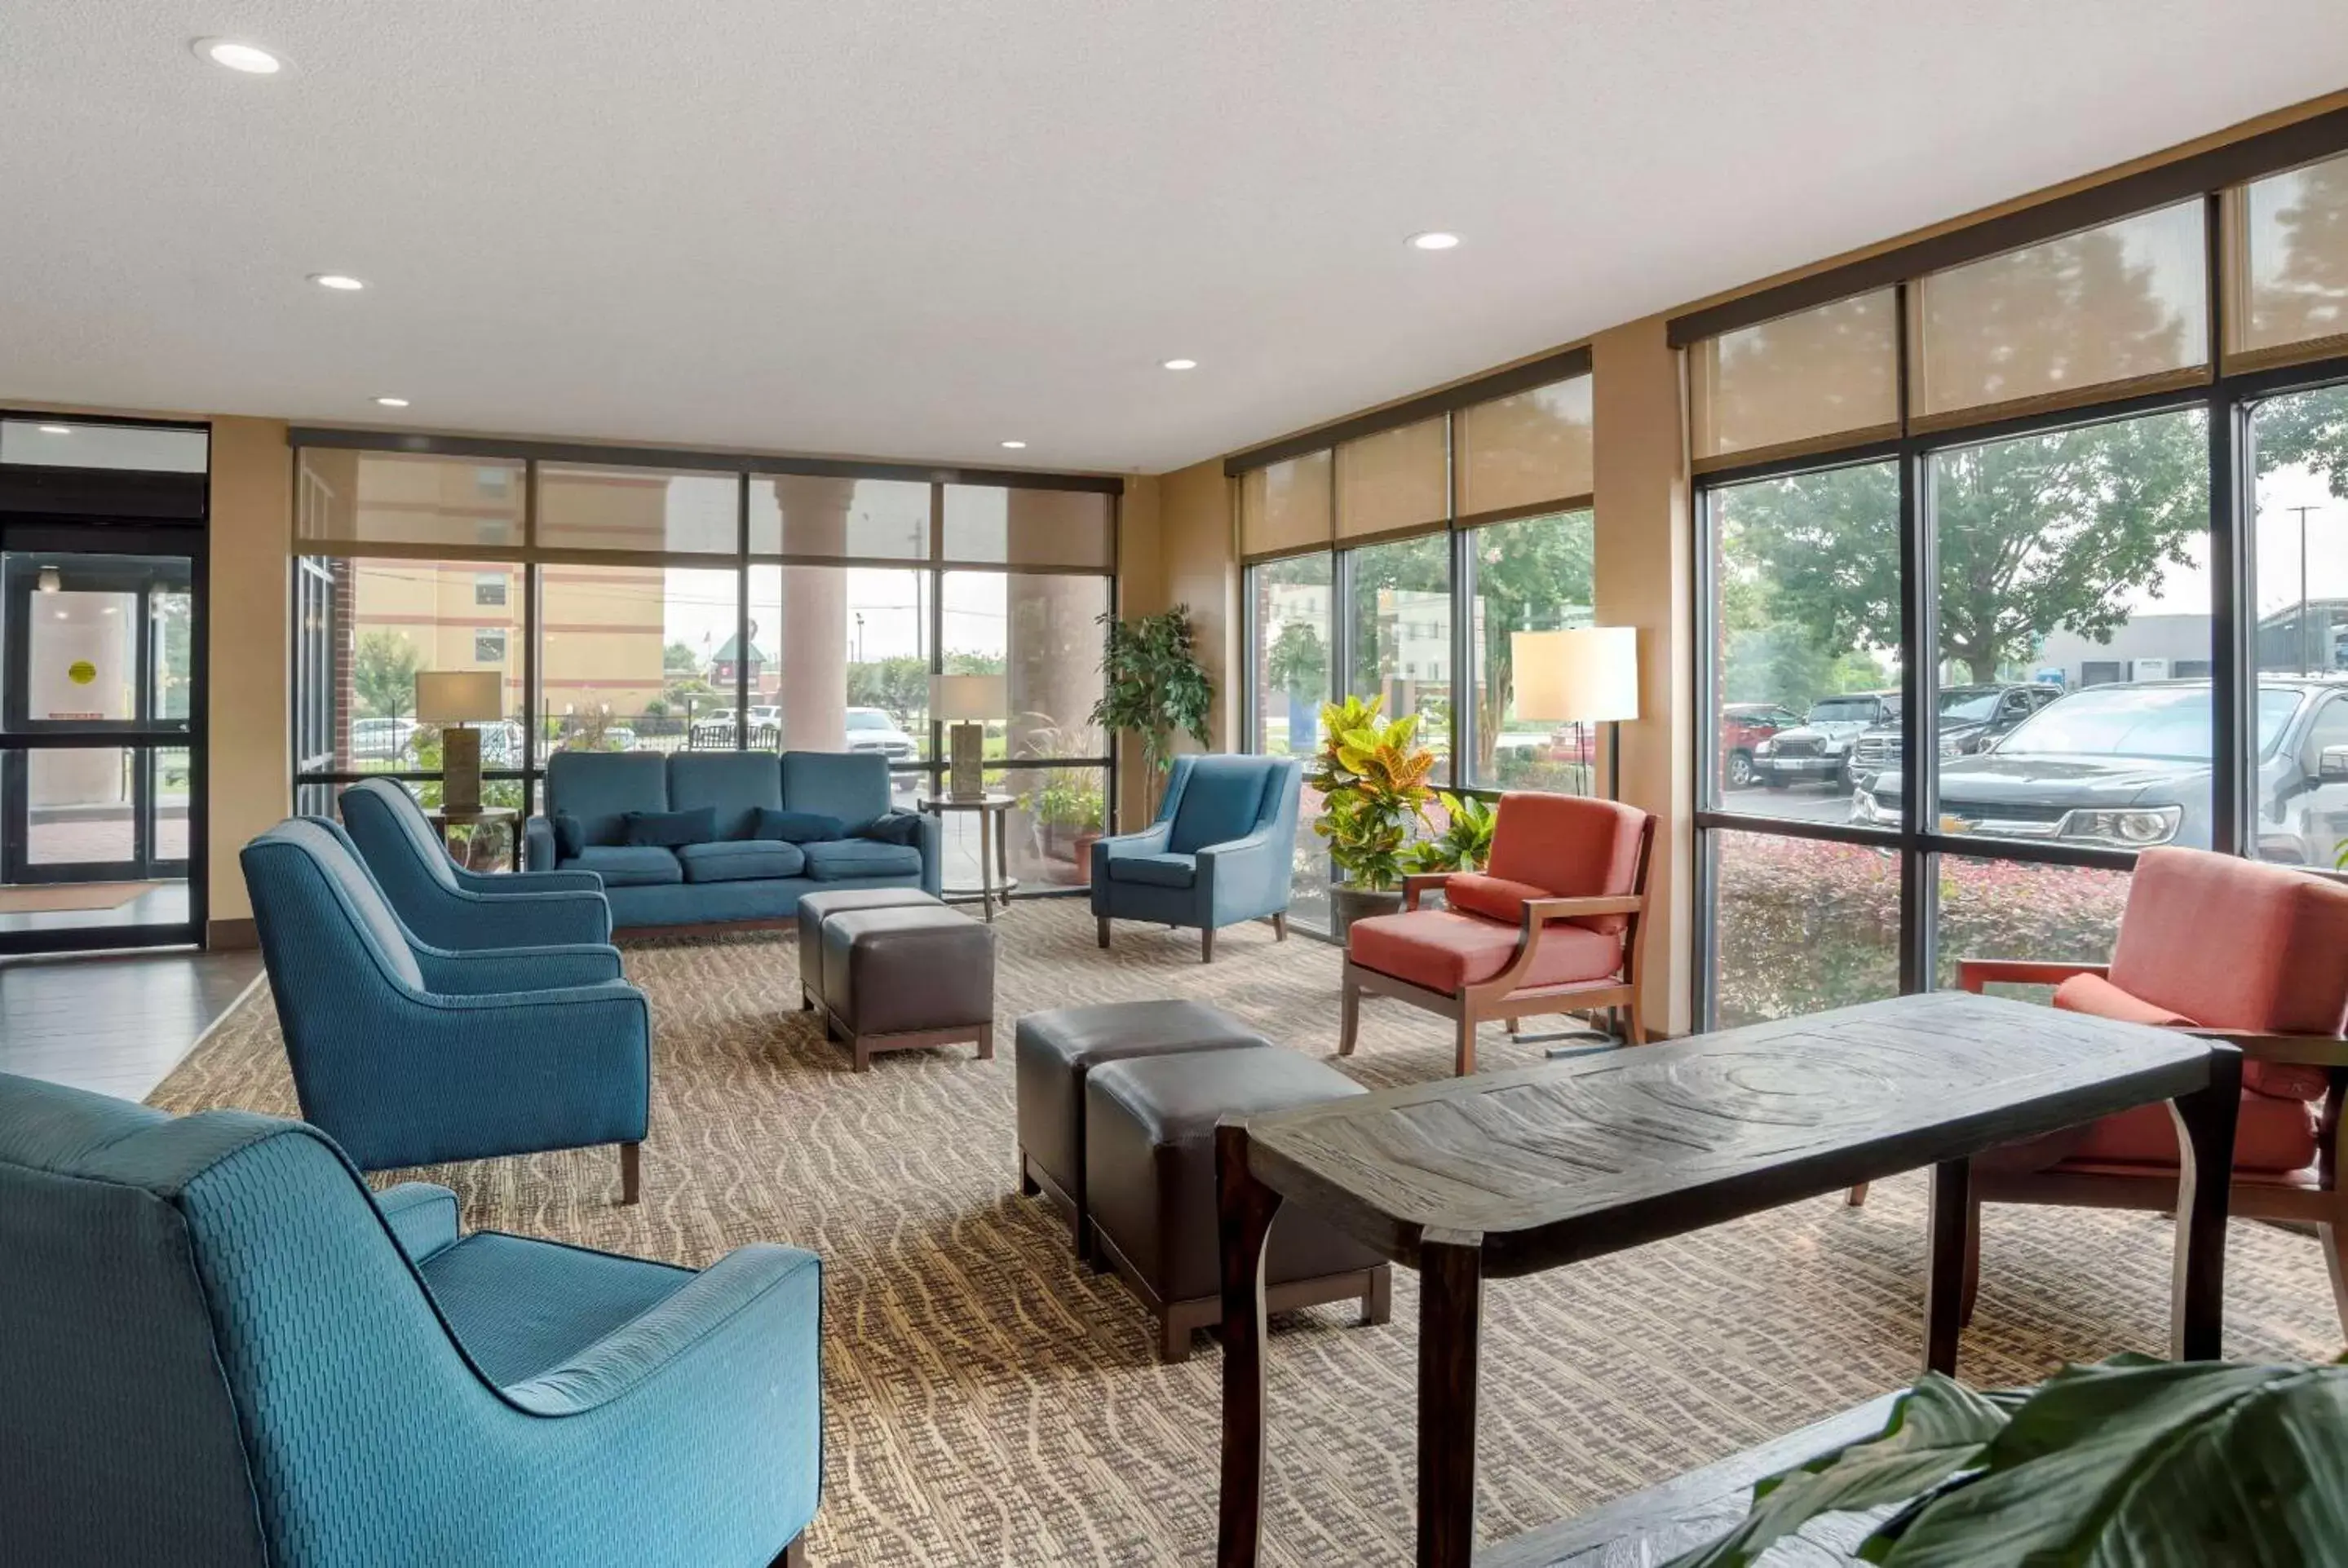 Lobby or reception in Comfort Suites Oxford I-20 exit 188